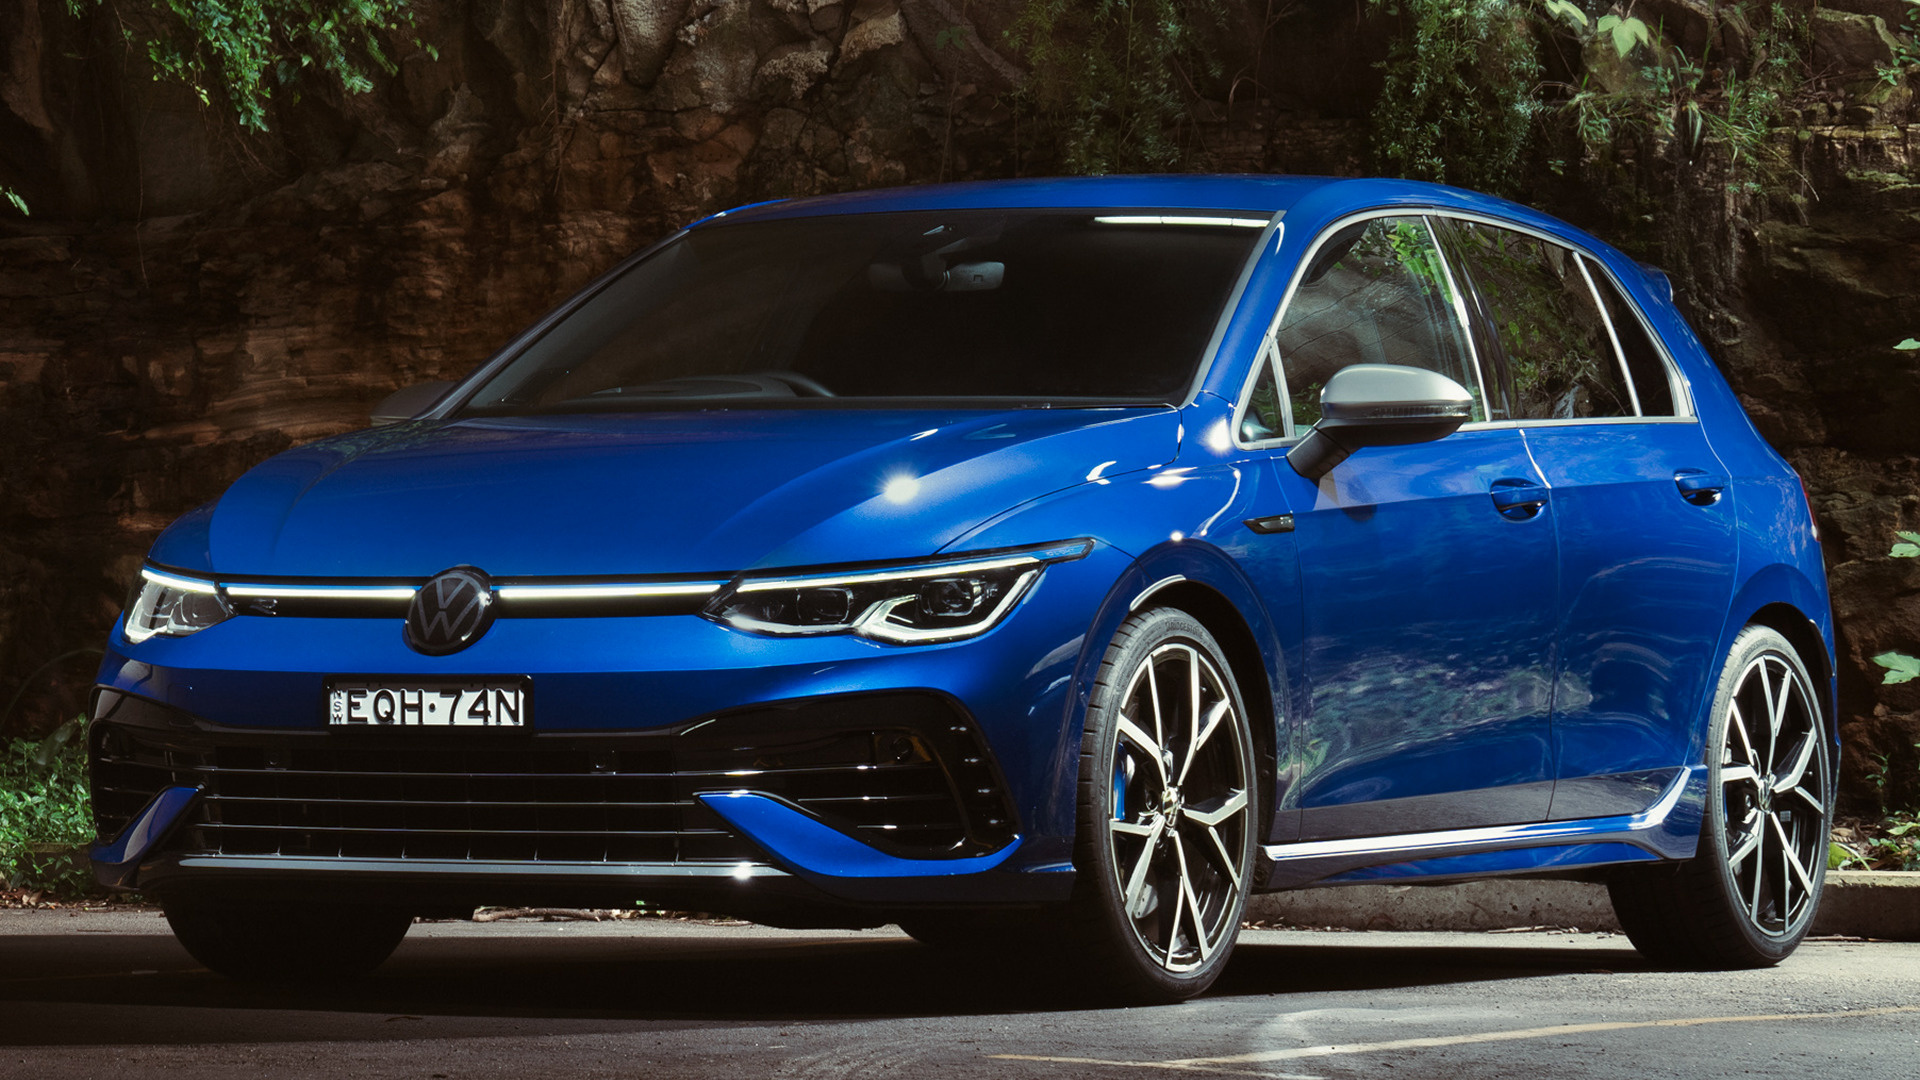 2022 Volkswagen Golf R (AU) - Wallpapers and HD Images | Car Pixel